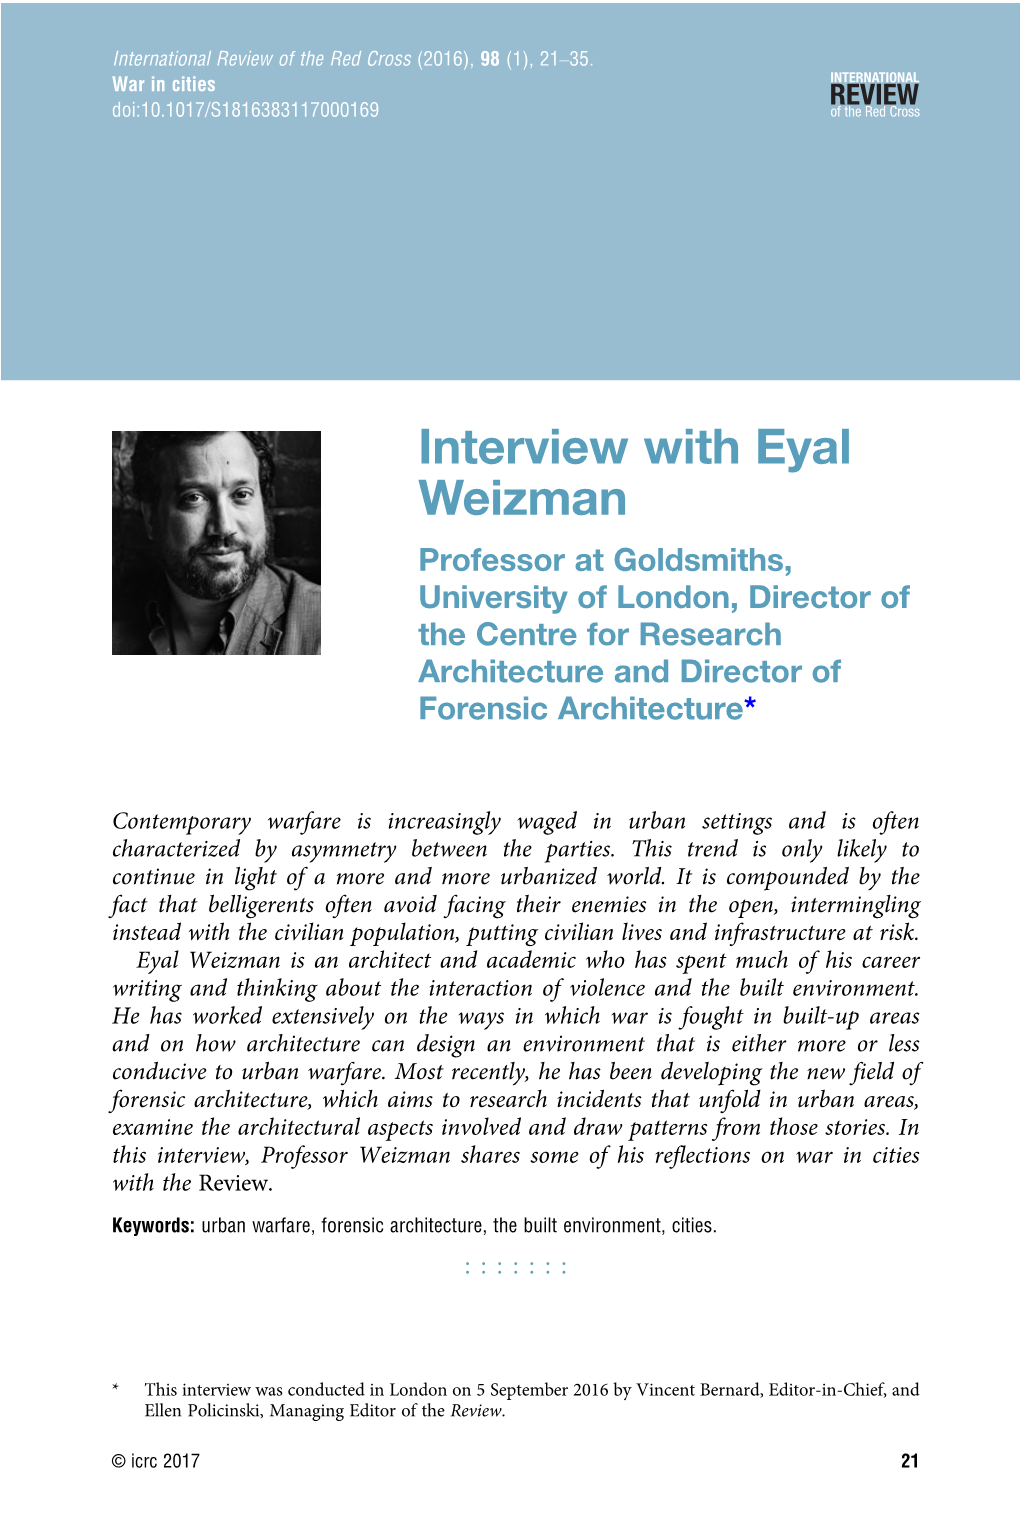 Interview with Eyal Weizman Professor at Goldsmiths, University of London, Director of the Centre for Research Architecture and Director of Forensic Architecture*